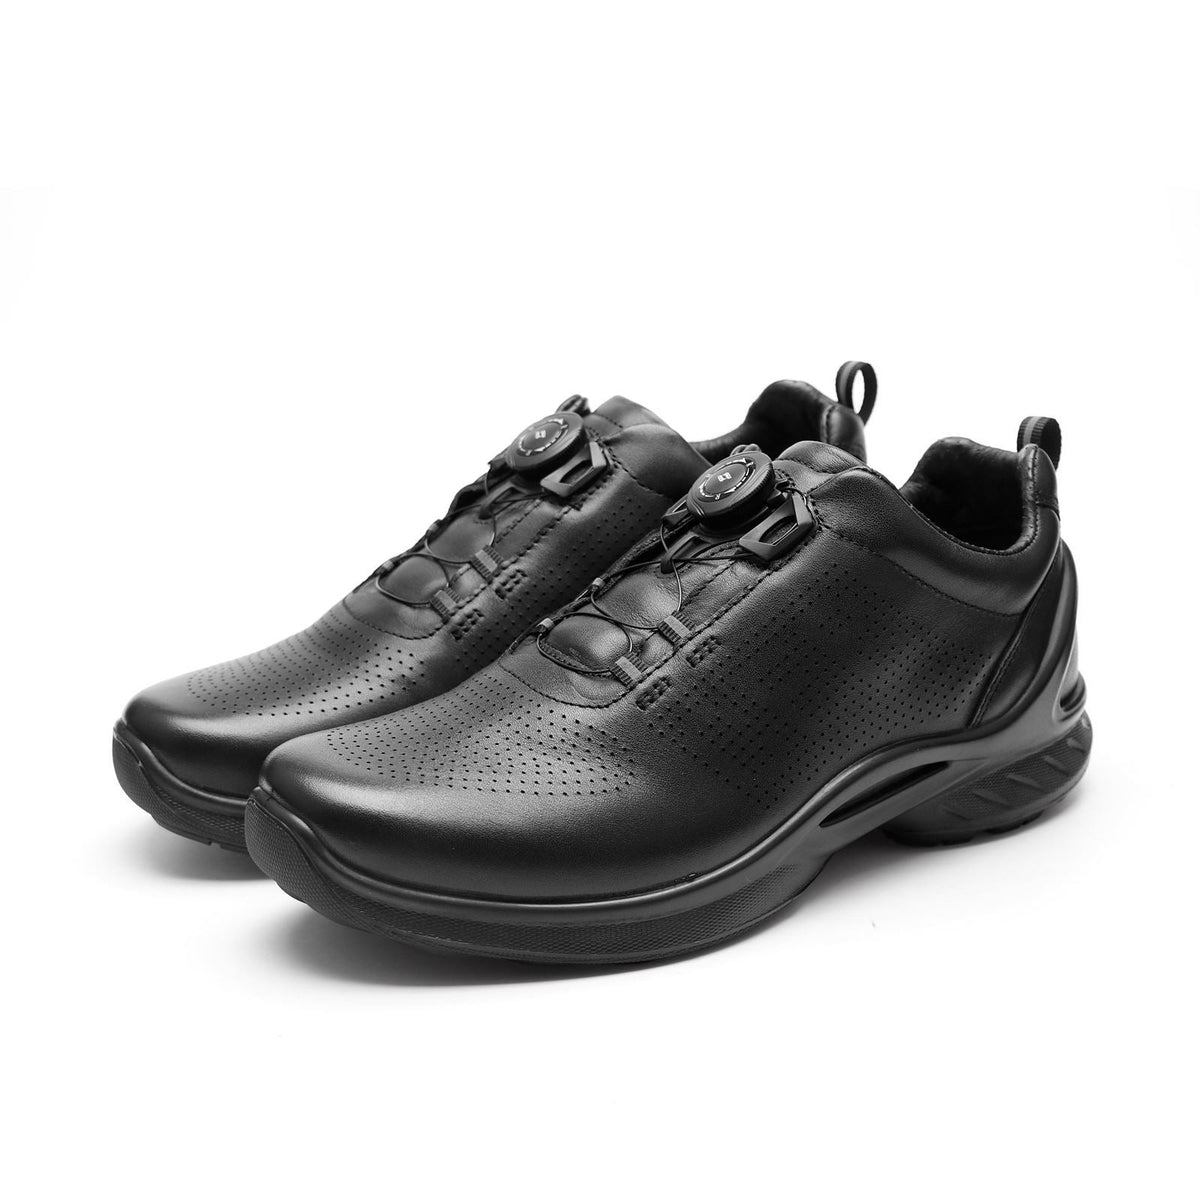 BlackBreeze®: Men's Breathable, Quick-On Commuter Shoes with Athletic Comfort